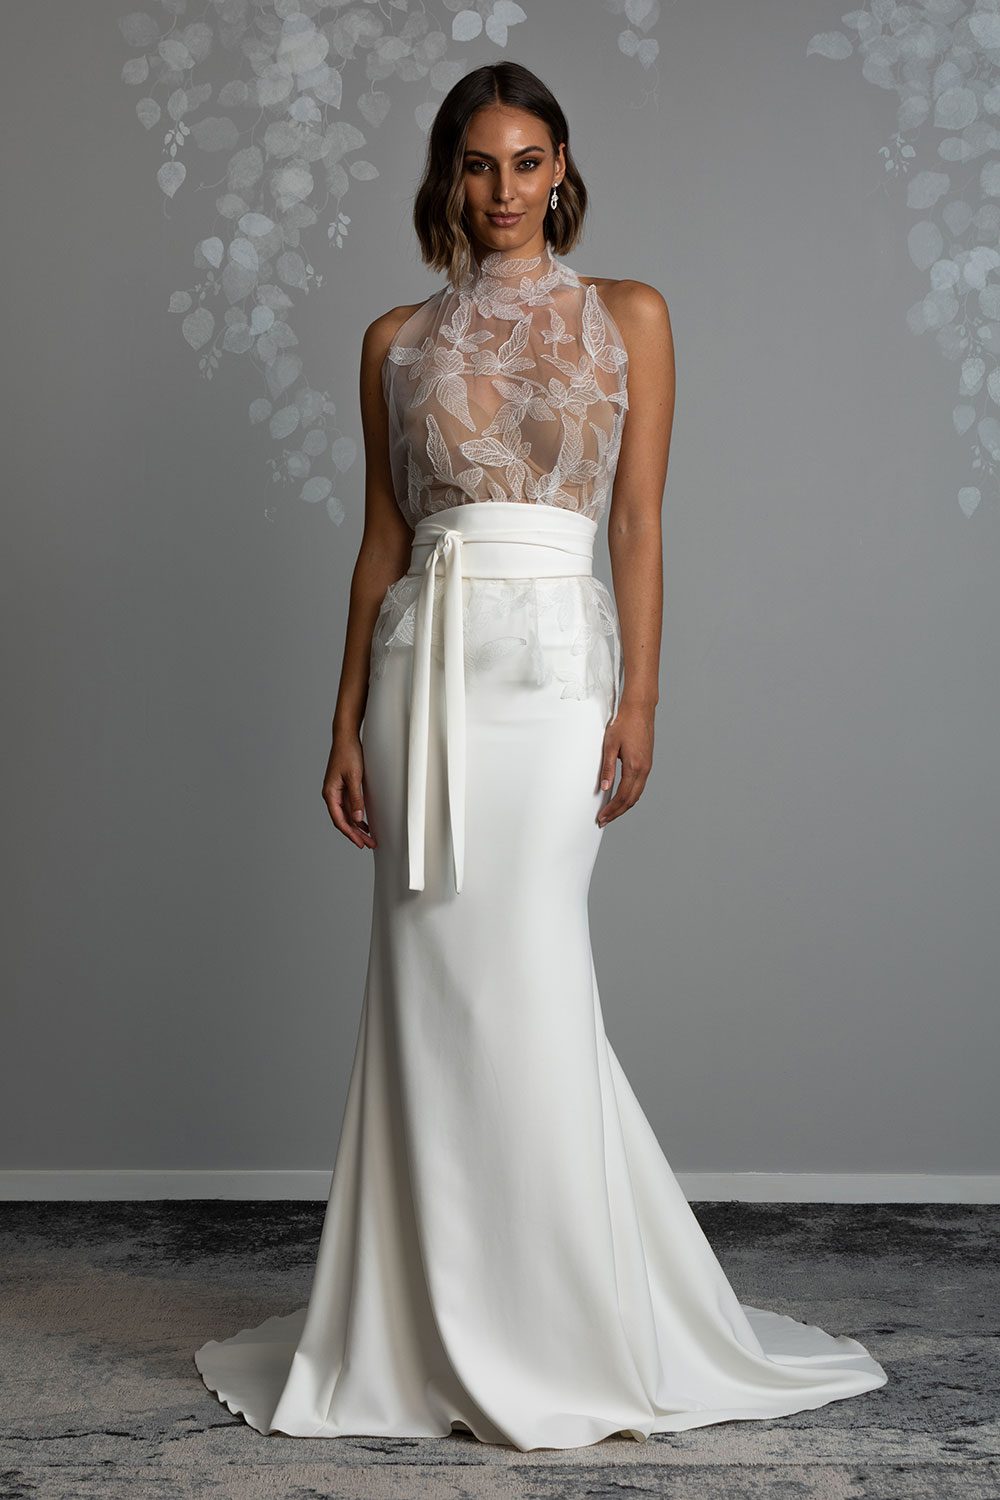 Mio Wedding Dress from Vinka Design. The front detail of gown with a high necked delicately hand-embroidered leaf lace cinched in at the waist with a wide kimono belt with skirt. Model wearing high necked leaf lace tulle bodice with kimono belt, and long skirt with train